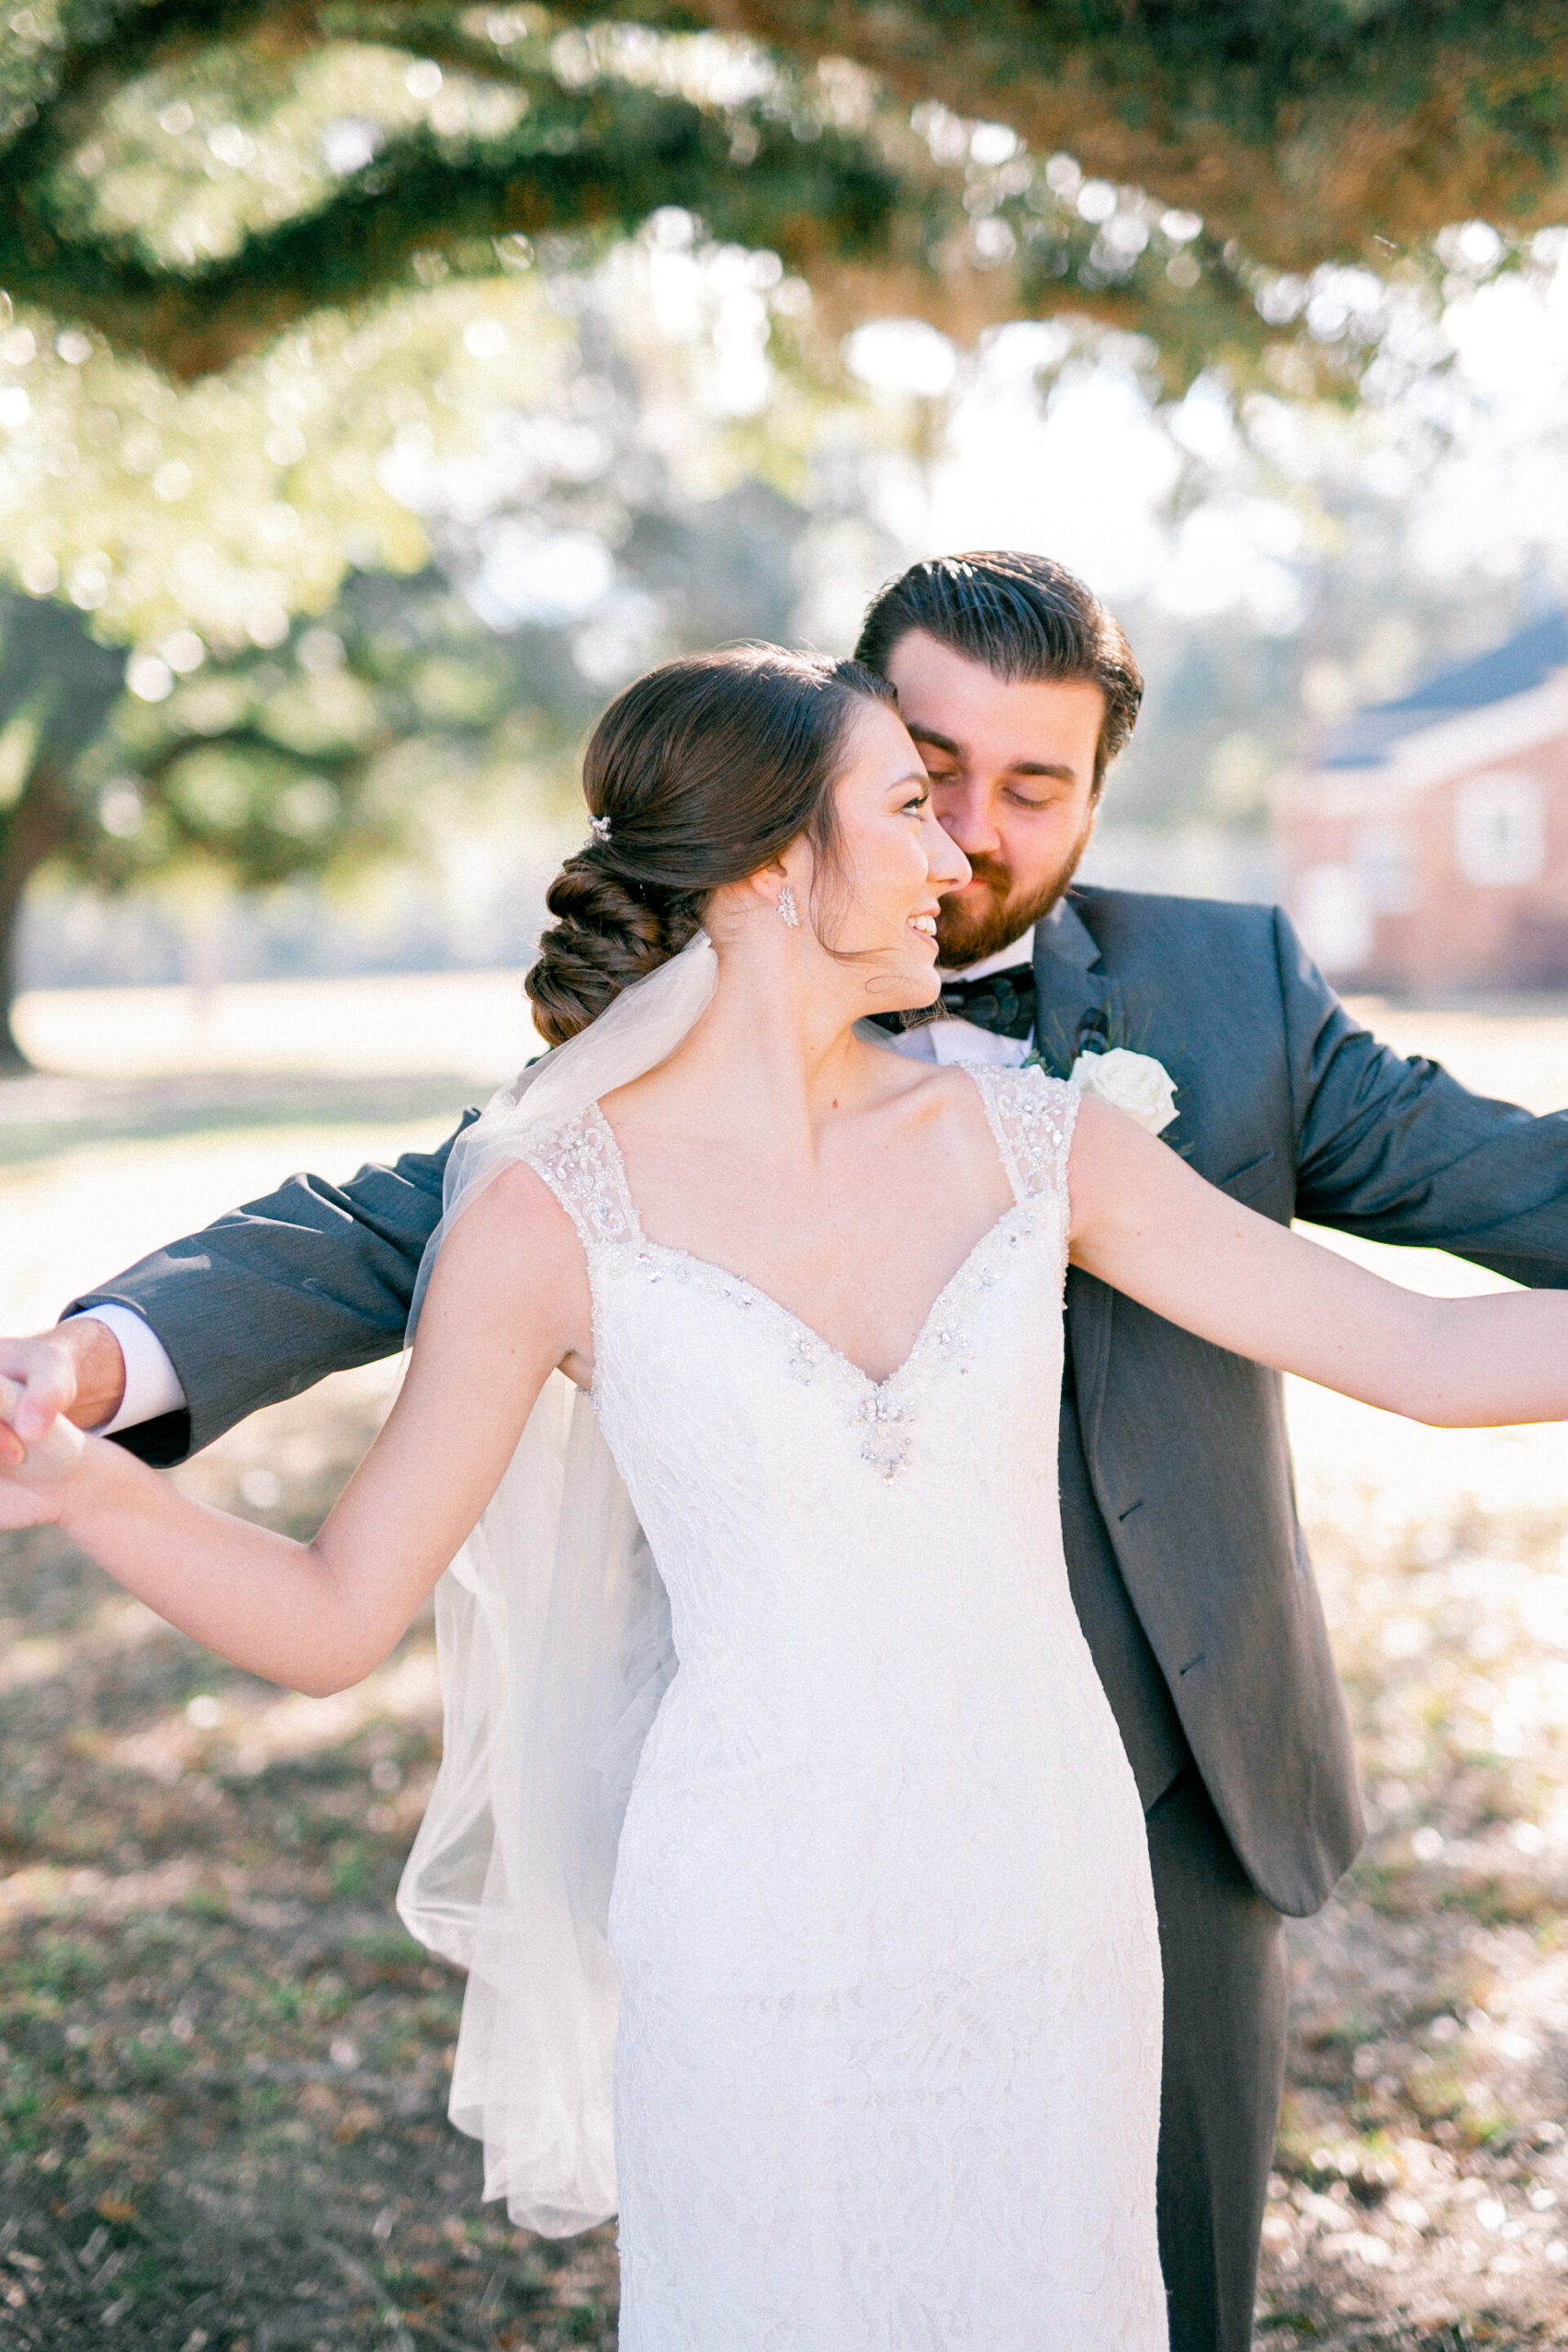 Bride and groom share candid moments before their wedding day in Charleston.